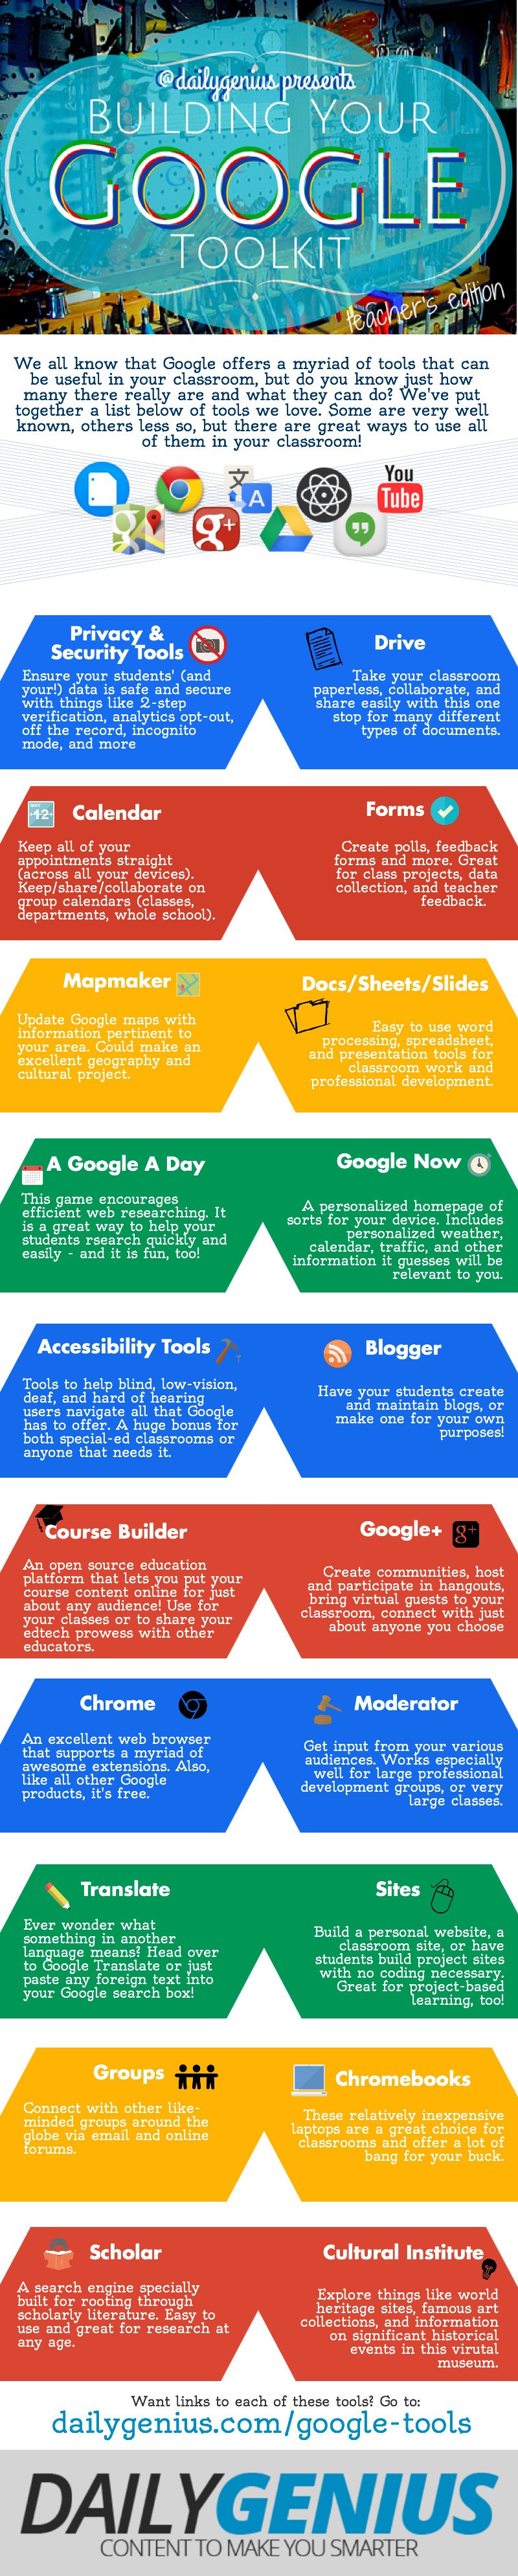 Educational Technology Guy Excellent infographic of Google tools and uses